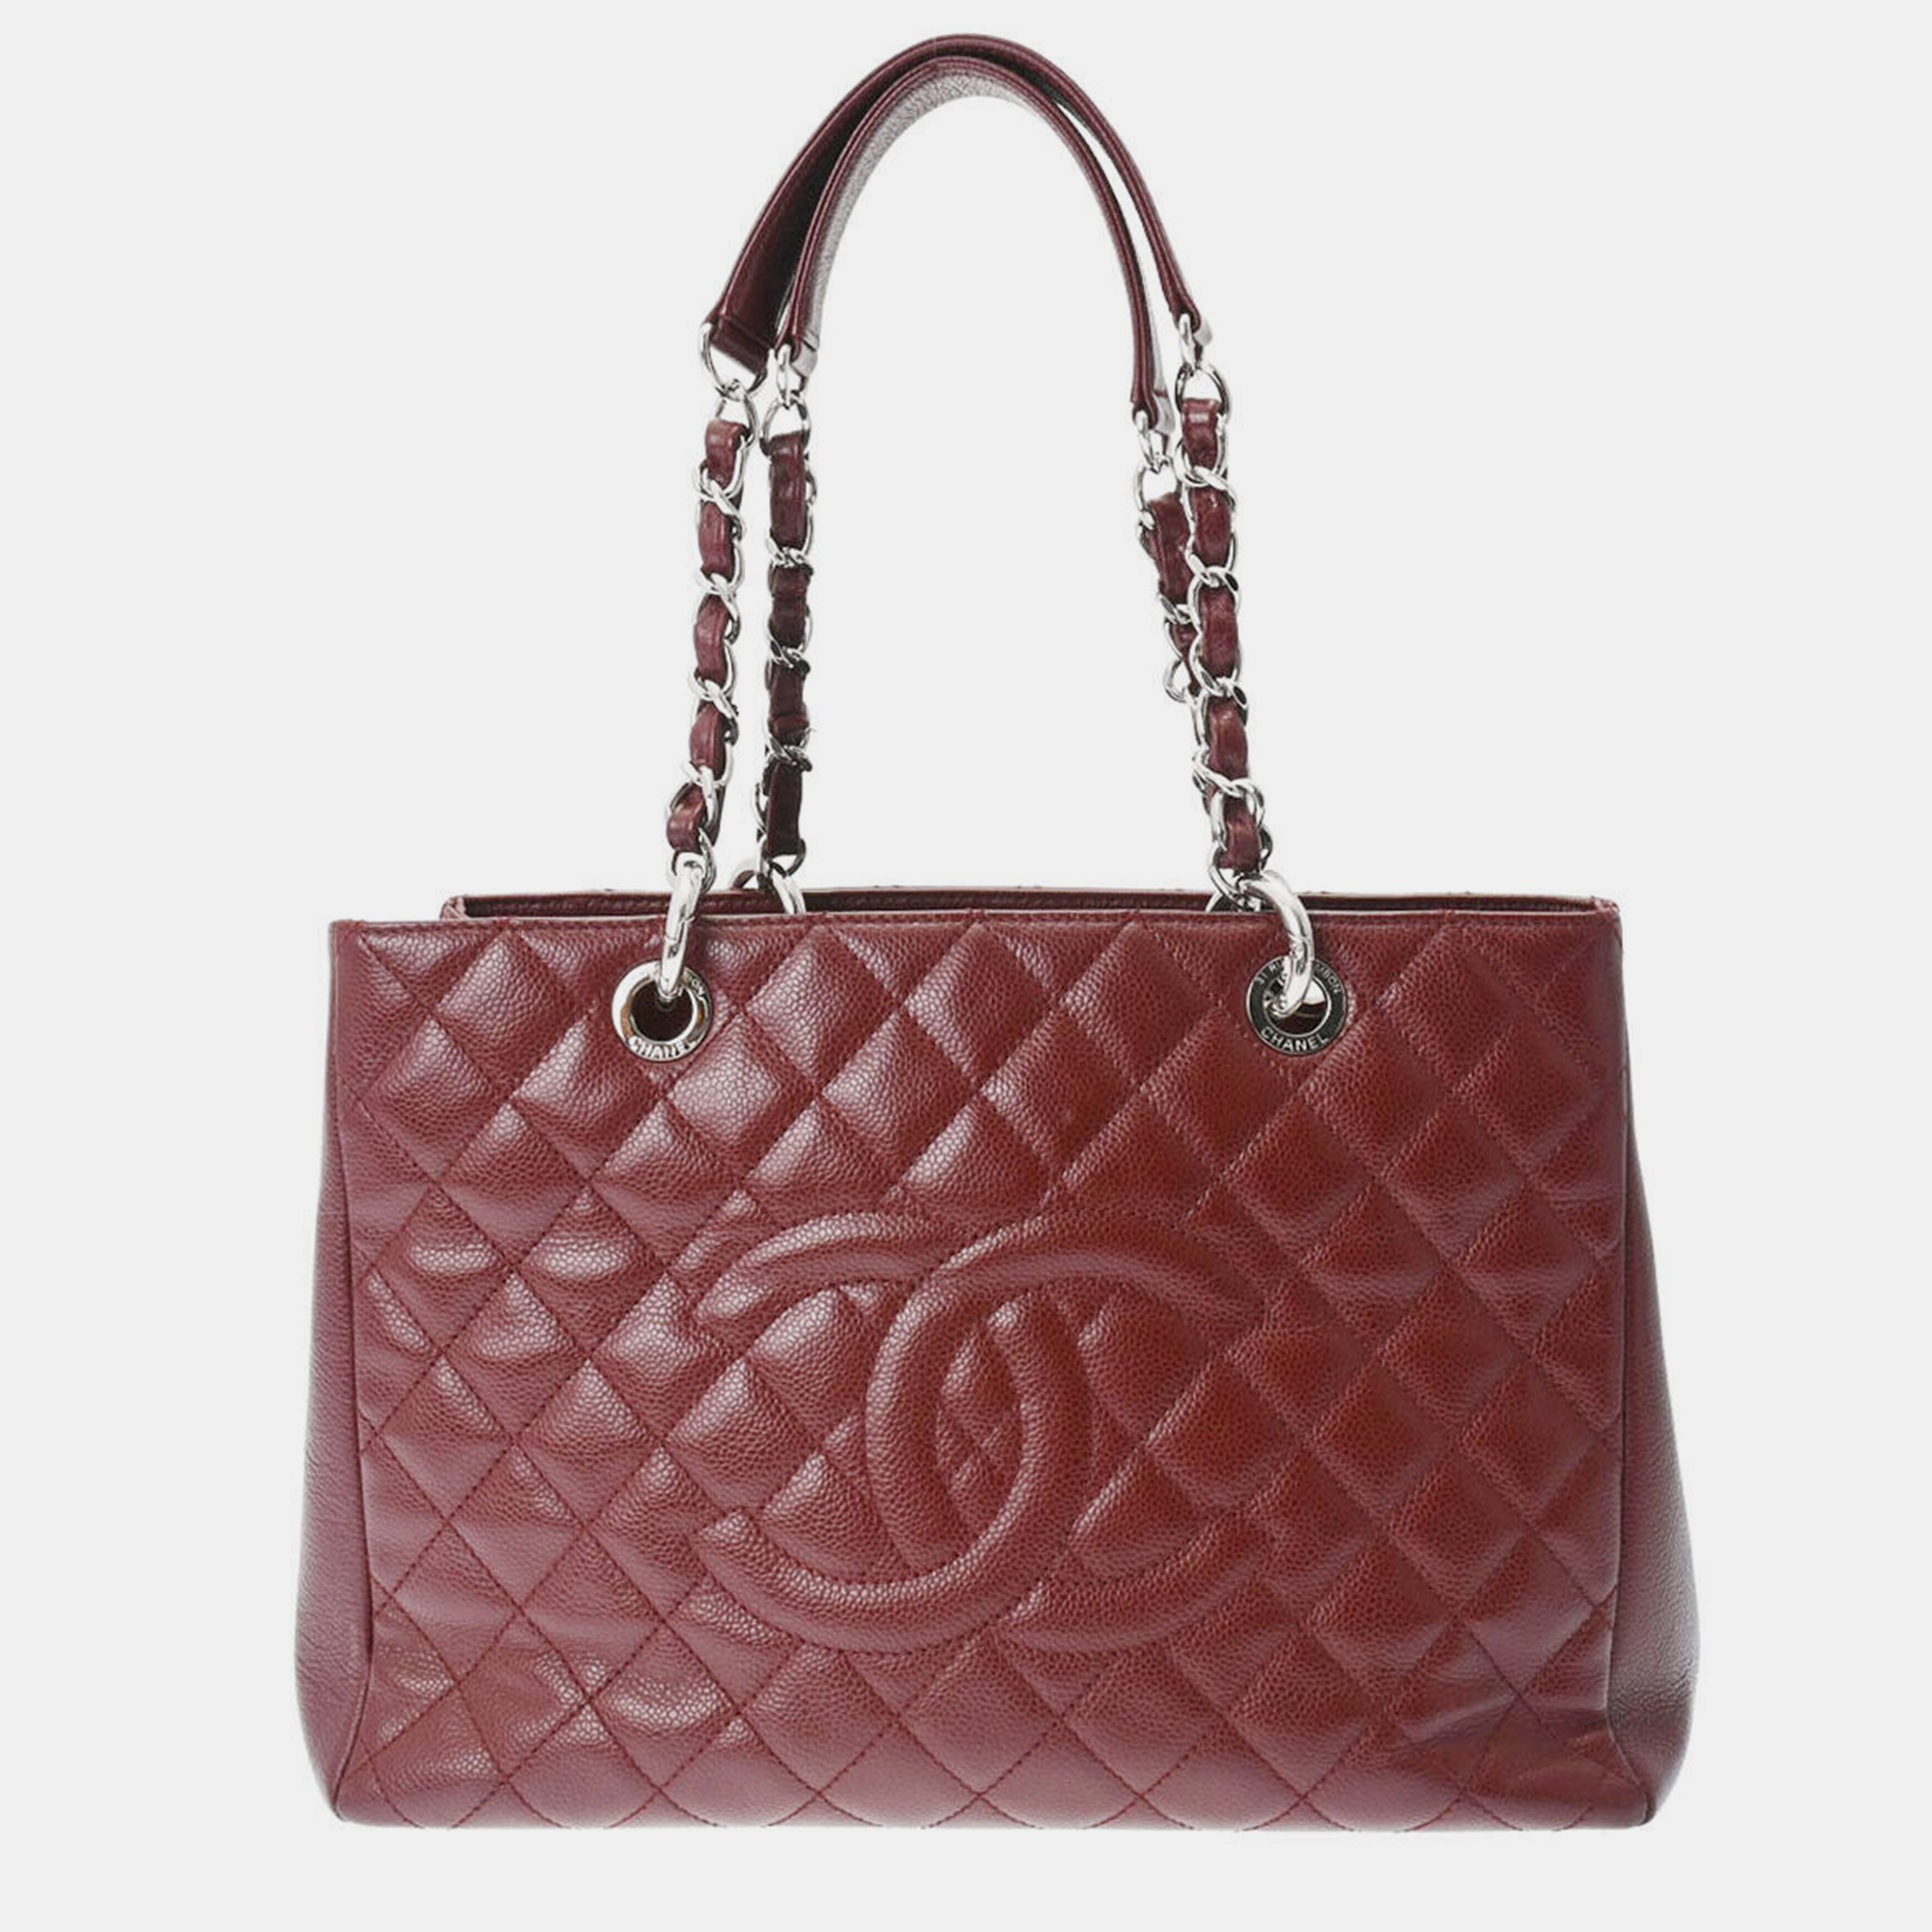 

Chanel Red Caviar Leather  GST Totes